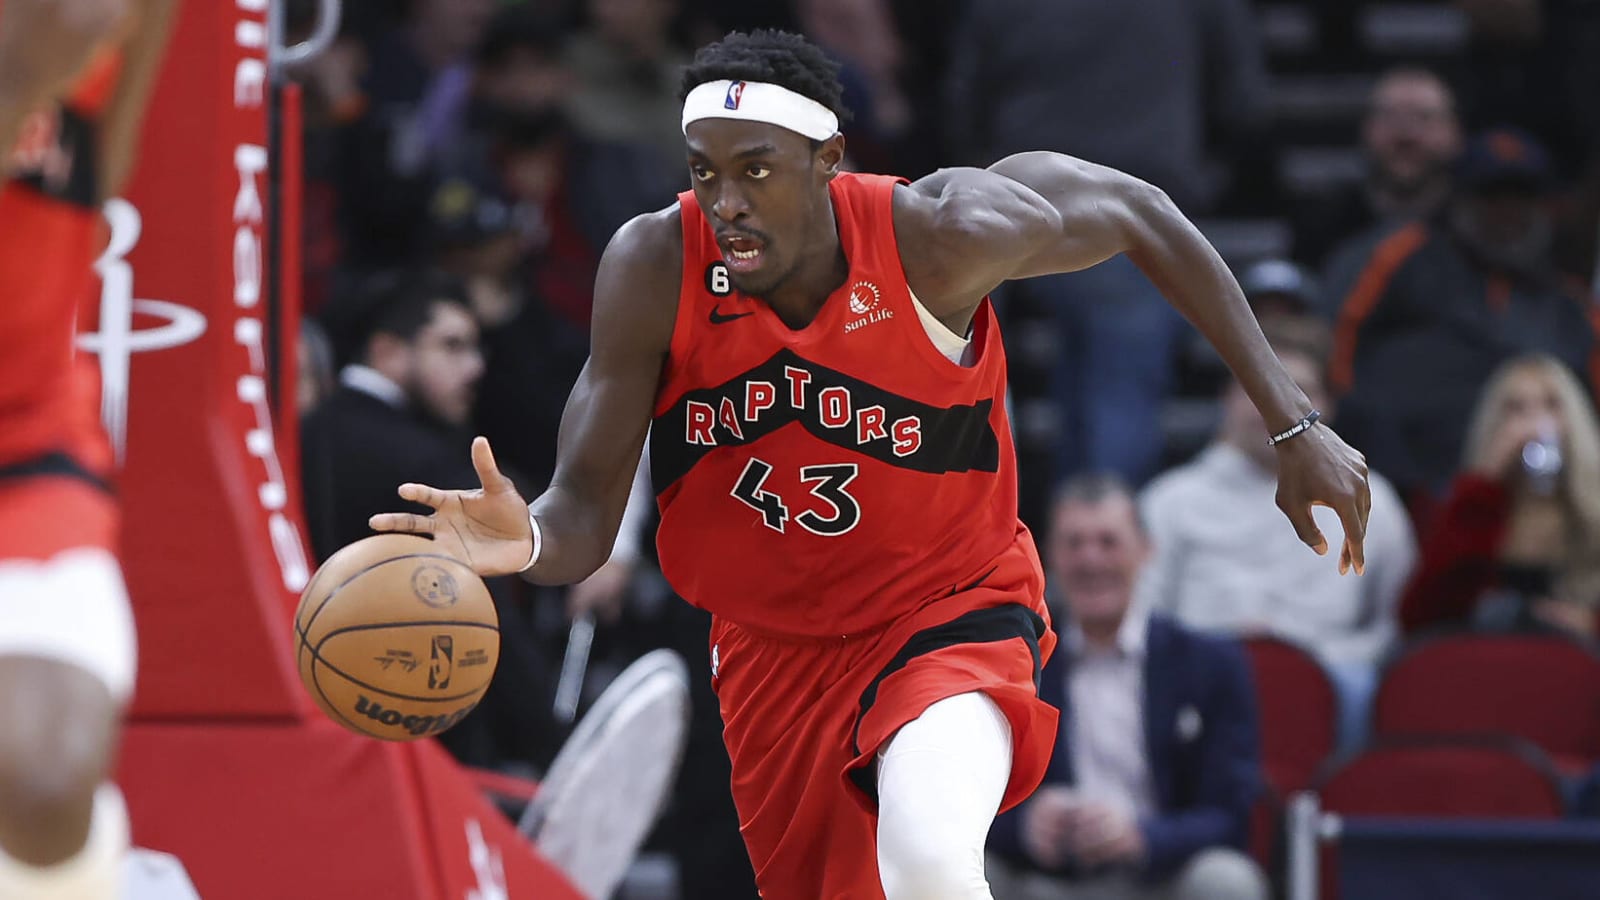 NBA Trade Rumors: Memphis Grizzlies Could Make A Move For OG Anunoby, Fadeaway World